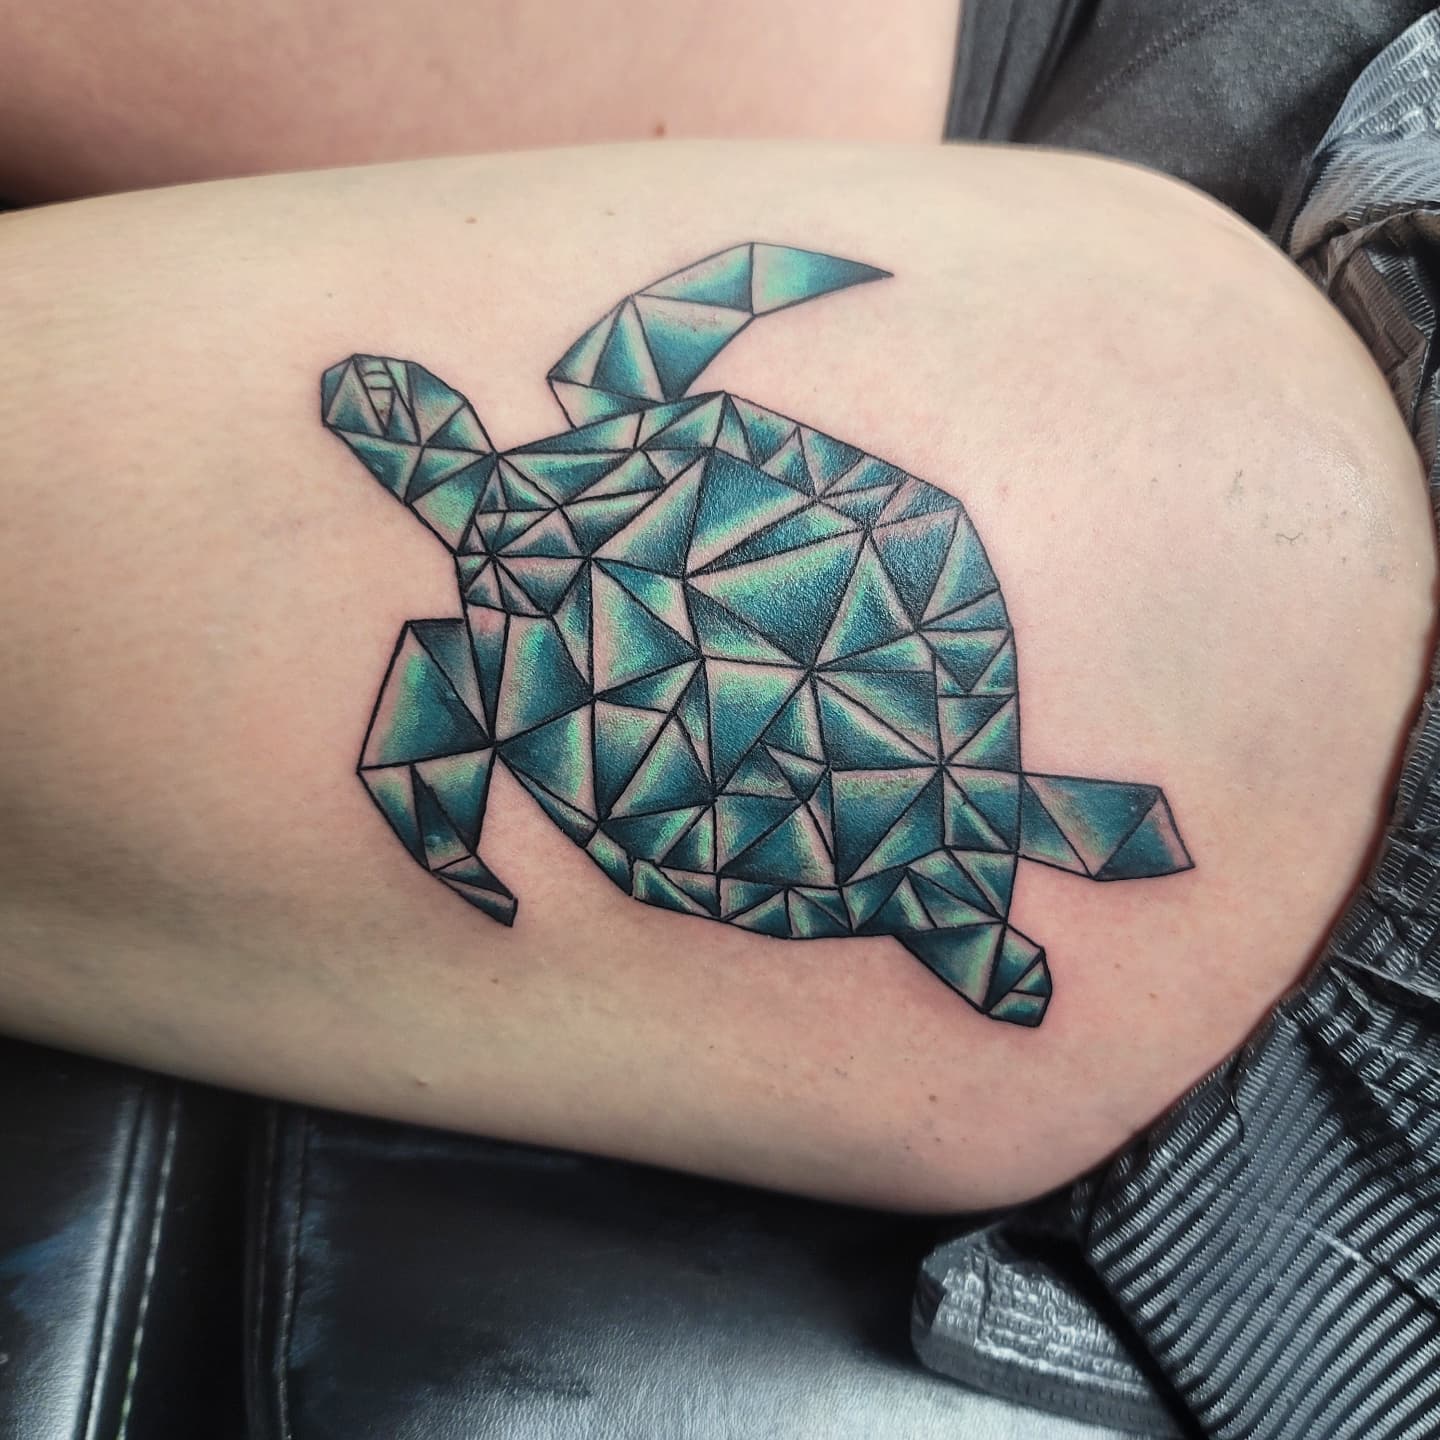 The abstraction of this tattoo is adorable! It's so cool how the artist was able to take these shapes and create sea turtle. Why don't you give it a shot?